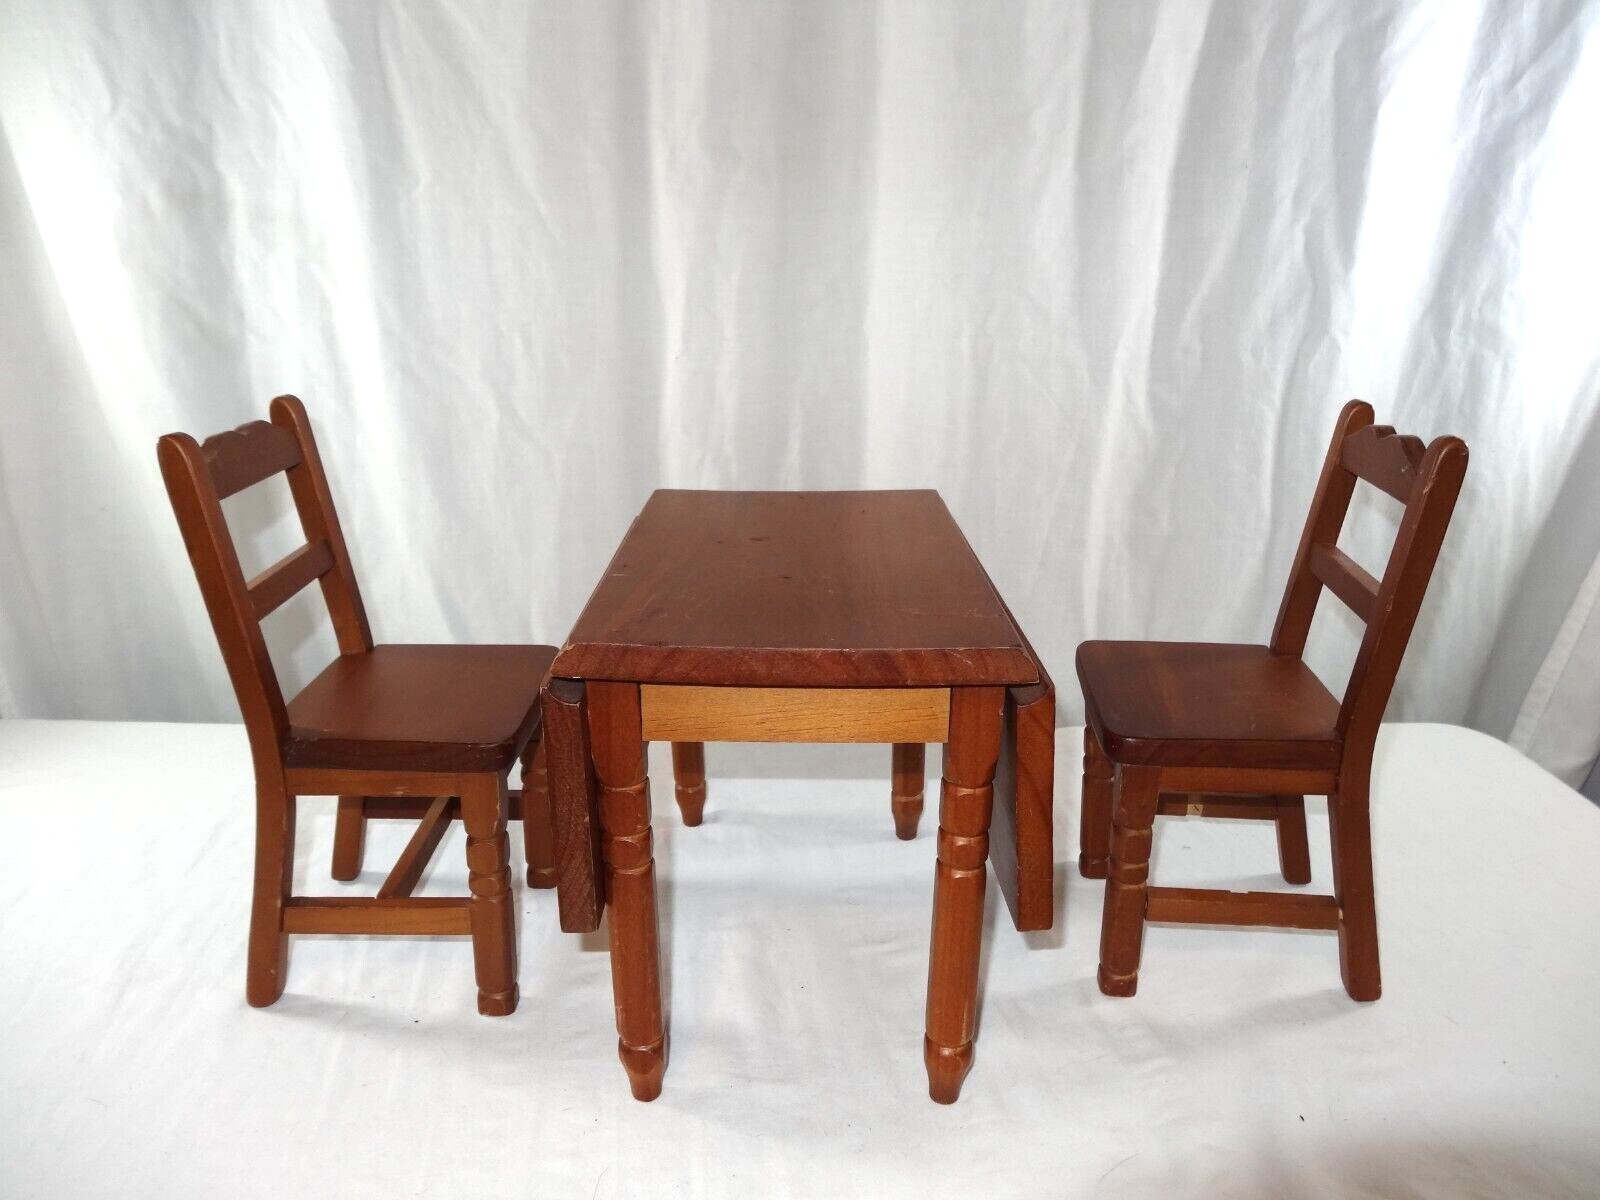 PLEASANT COMPANY American Girl Molly Birthday Drop Leaf TABLE & CHAIRS vintage - $113.85